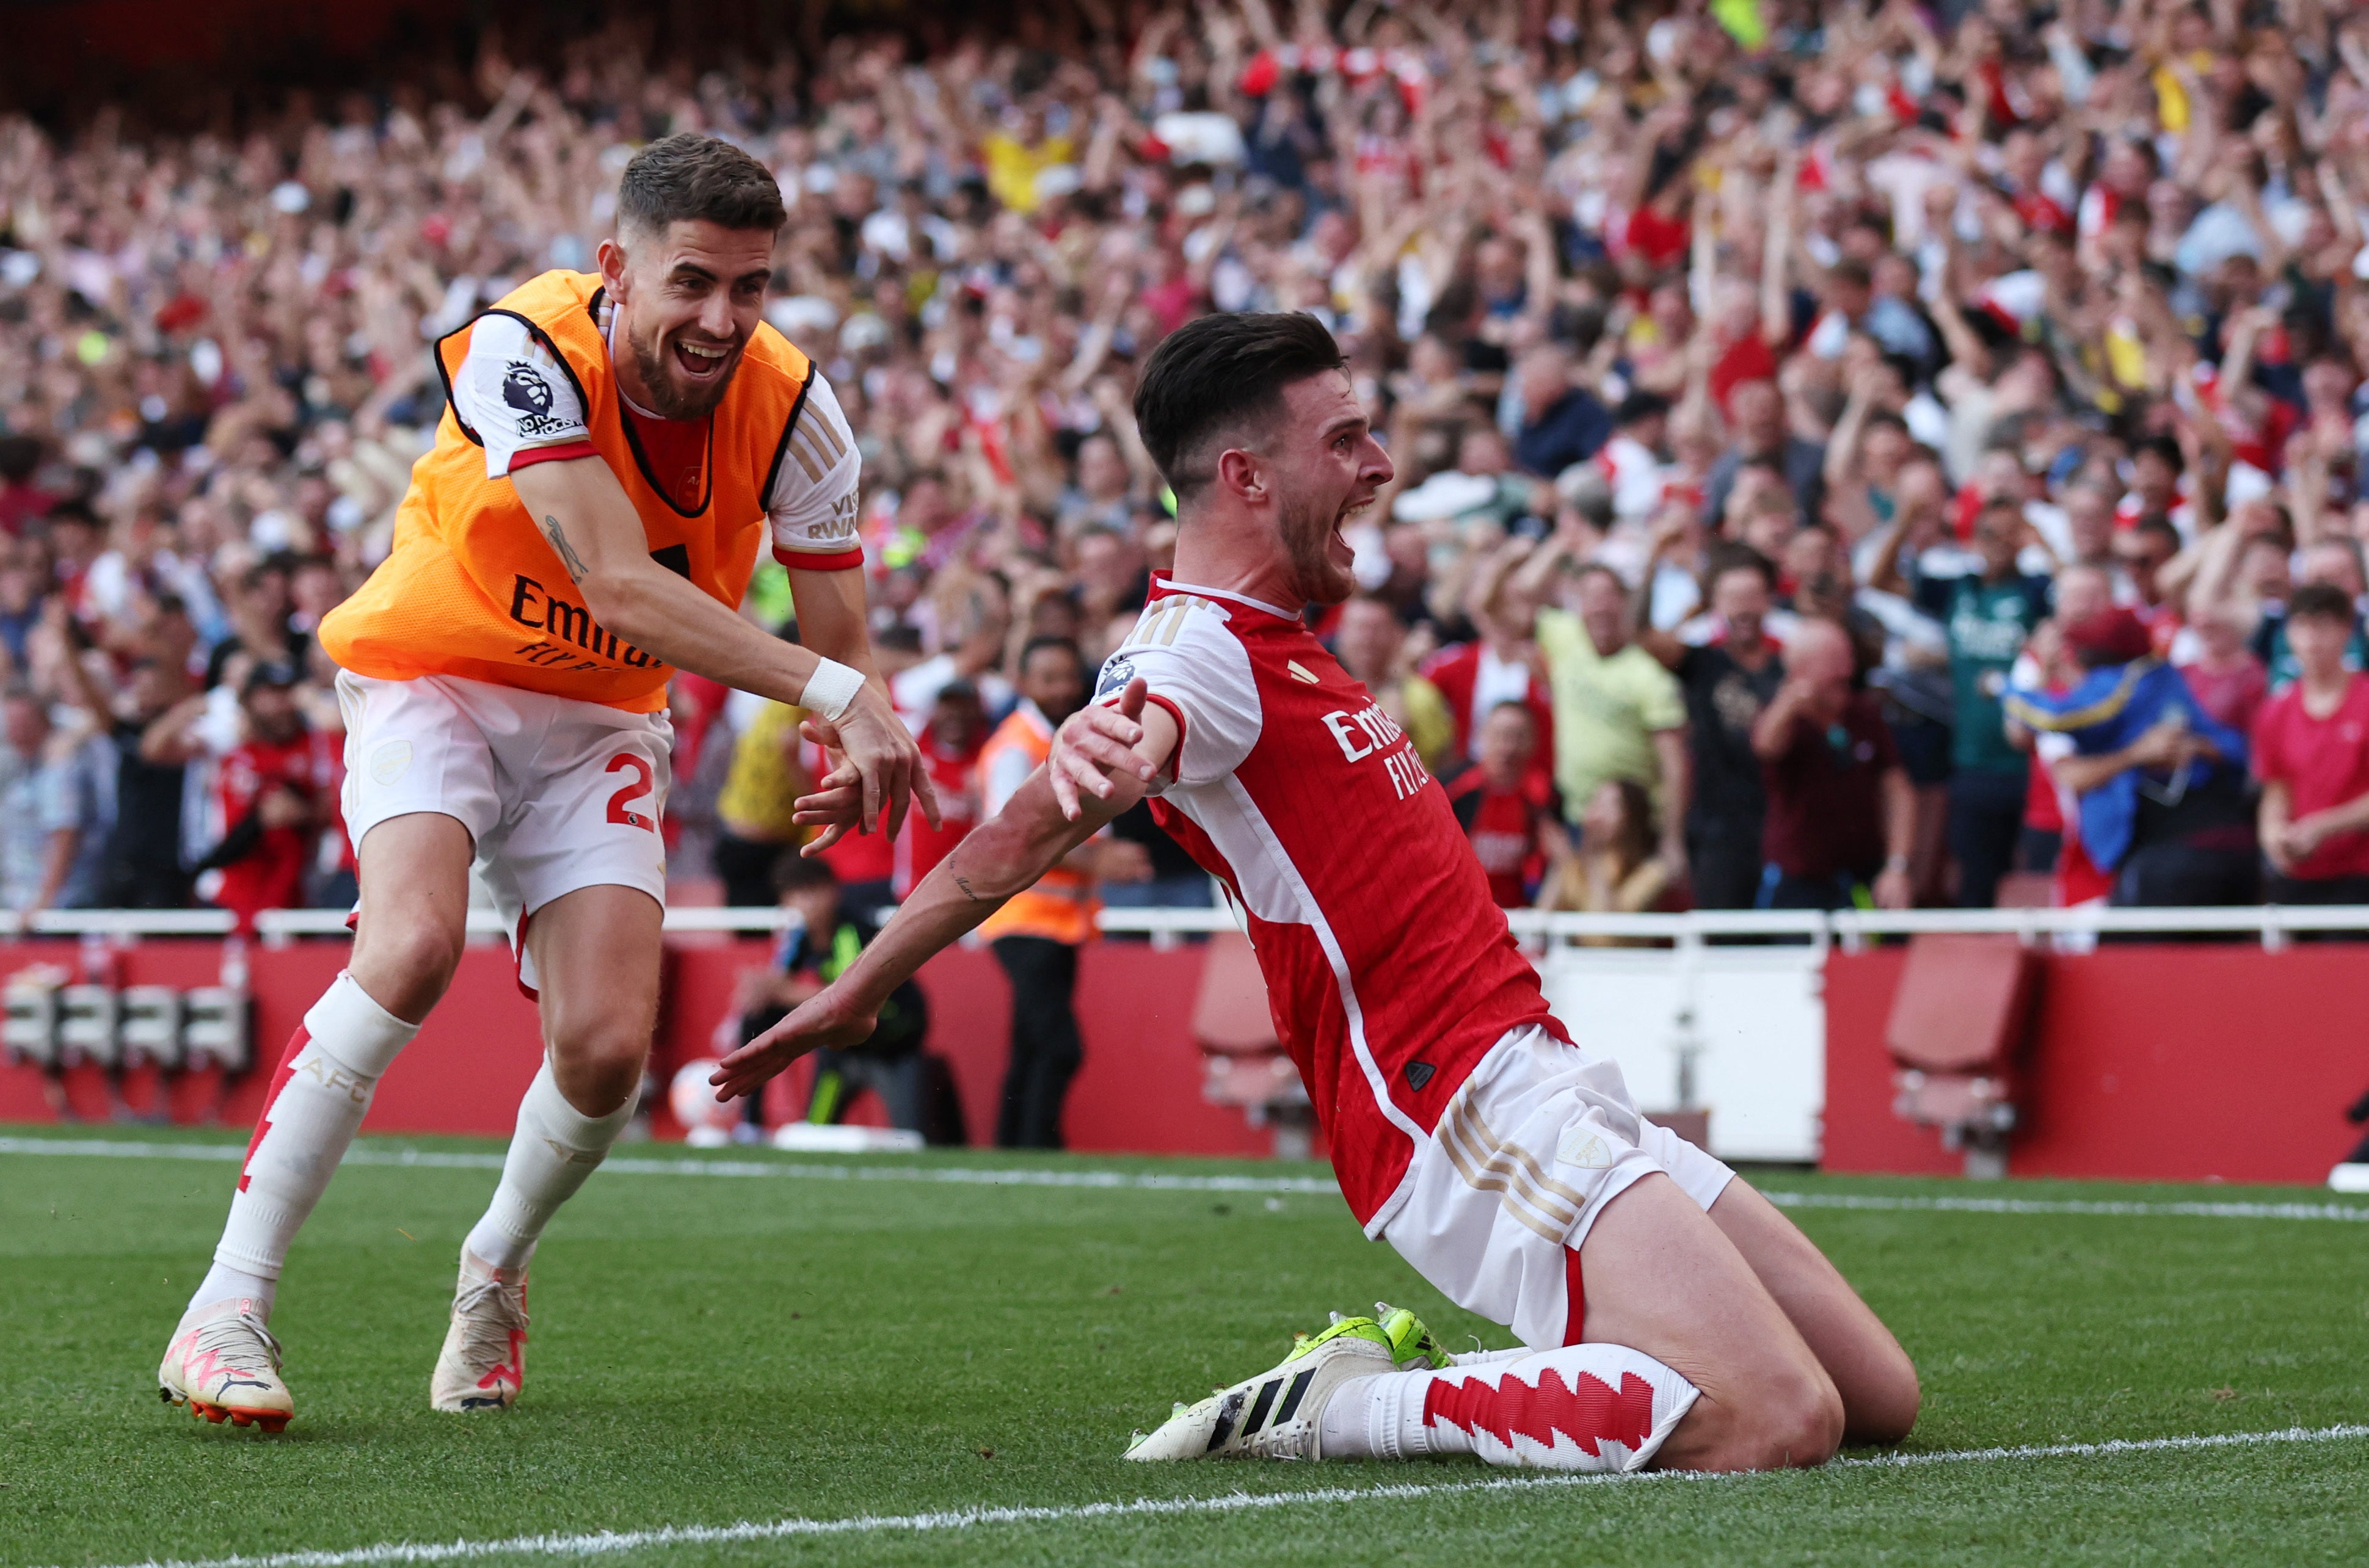 Report: Arsenal 3-1 Manchester United, News